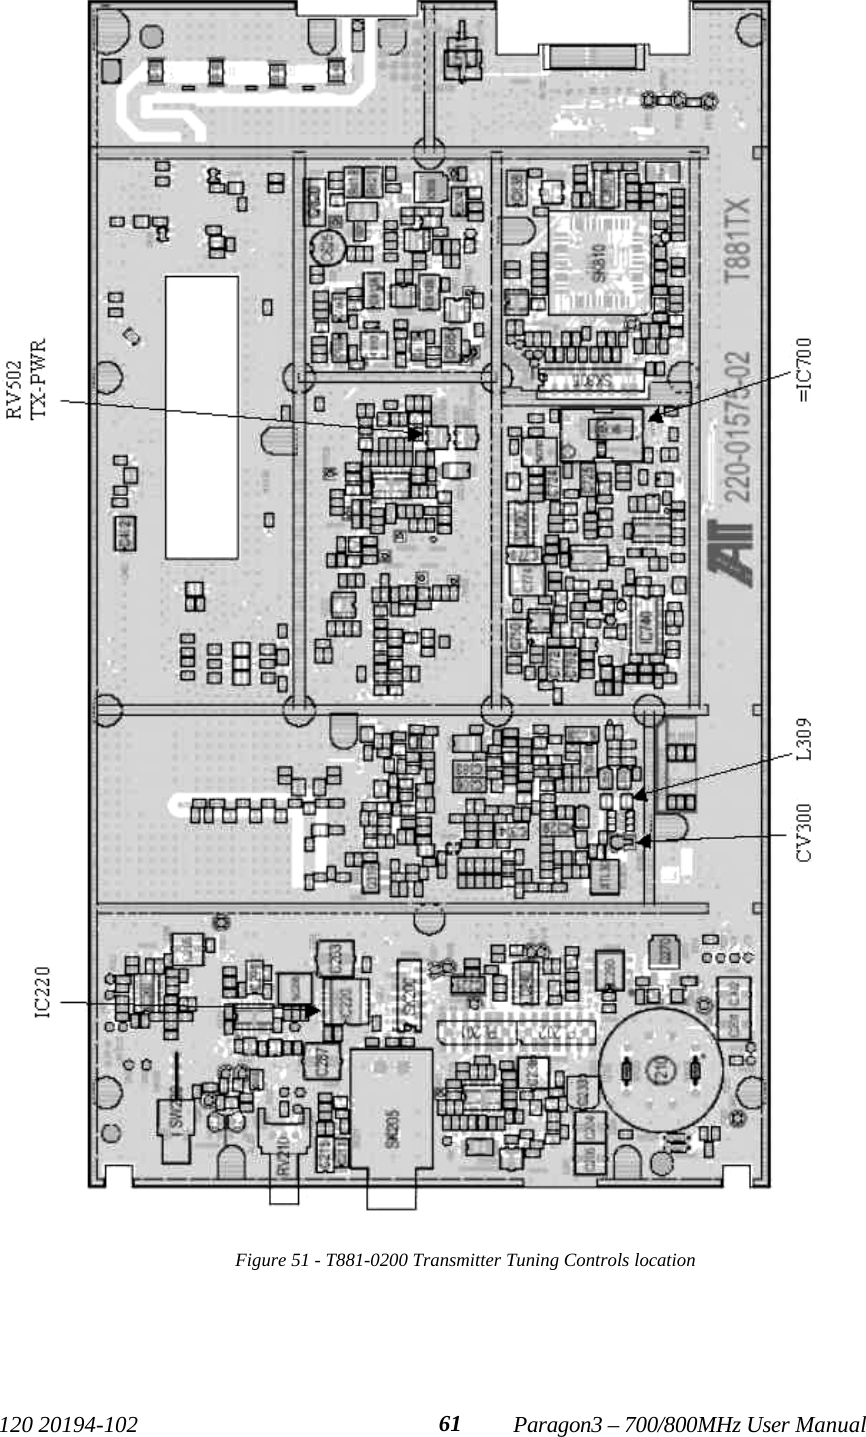  120 20194-102   Paragon3 – 700/800MHz User Manual 61  Figure 51 - T881-0200 Transmitter Tuning Controls location